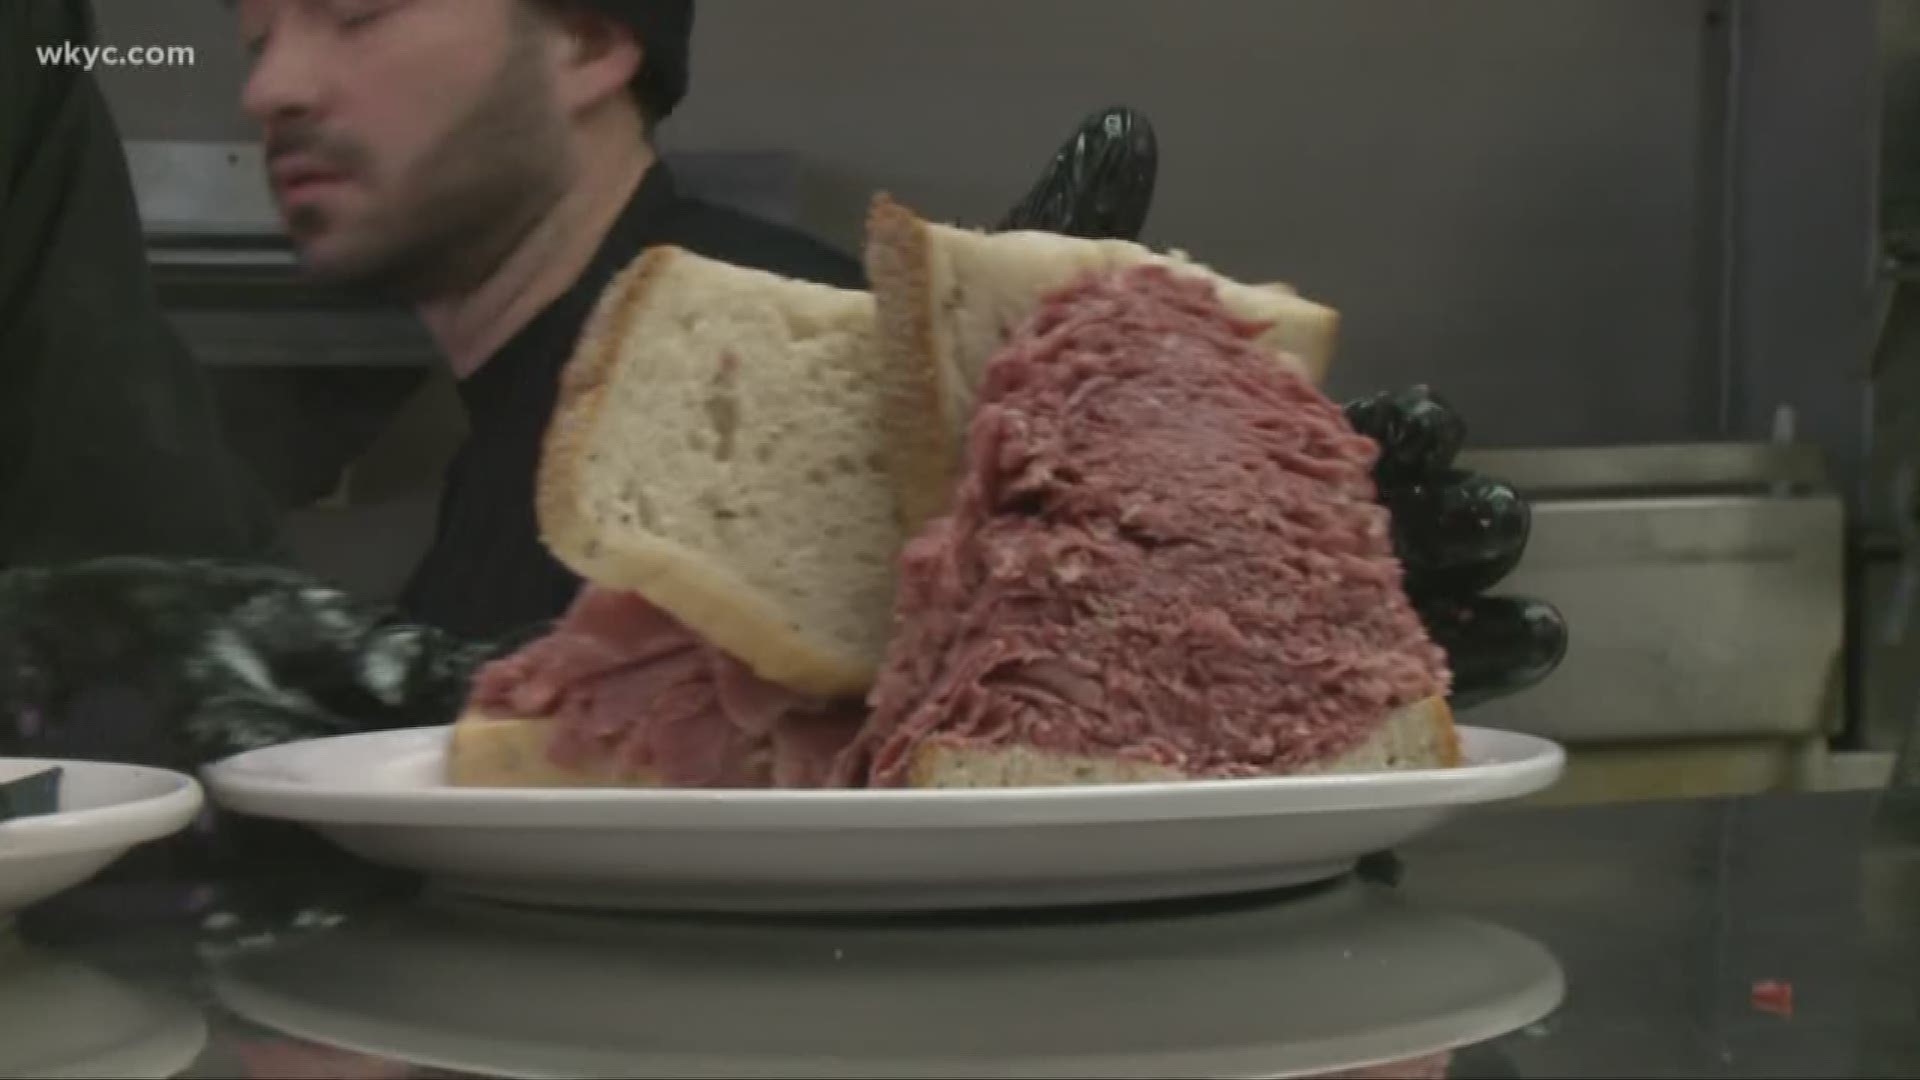 March 22, 2019: Its name has become synonymous with Cleveland. Welcome to Slyman's. For 55 years, Slyman's on St. Clair has been the cornerstone of corned beef! It's that legendary, over packed, juicy corned beef stuffed between two pieces of rye that has made them a Northeast Ohio staple.